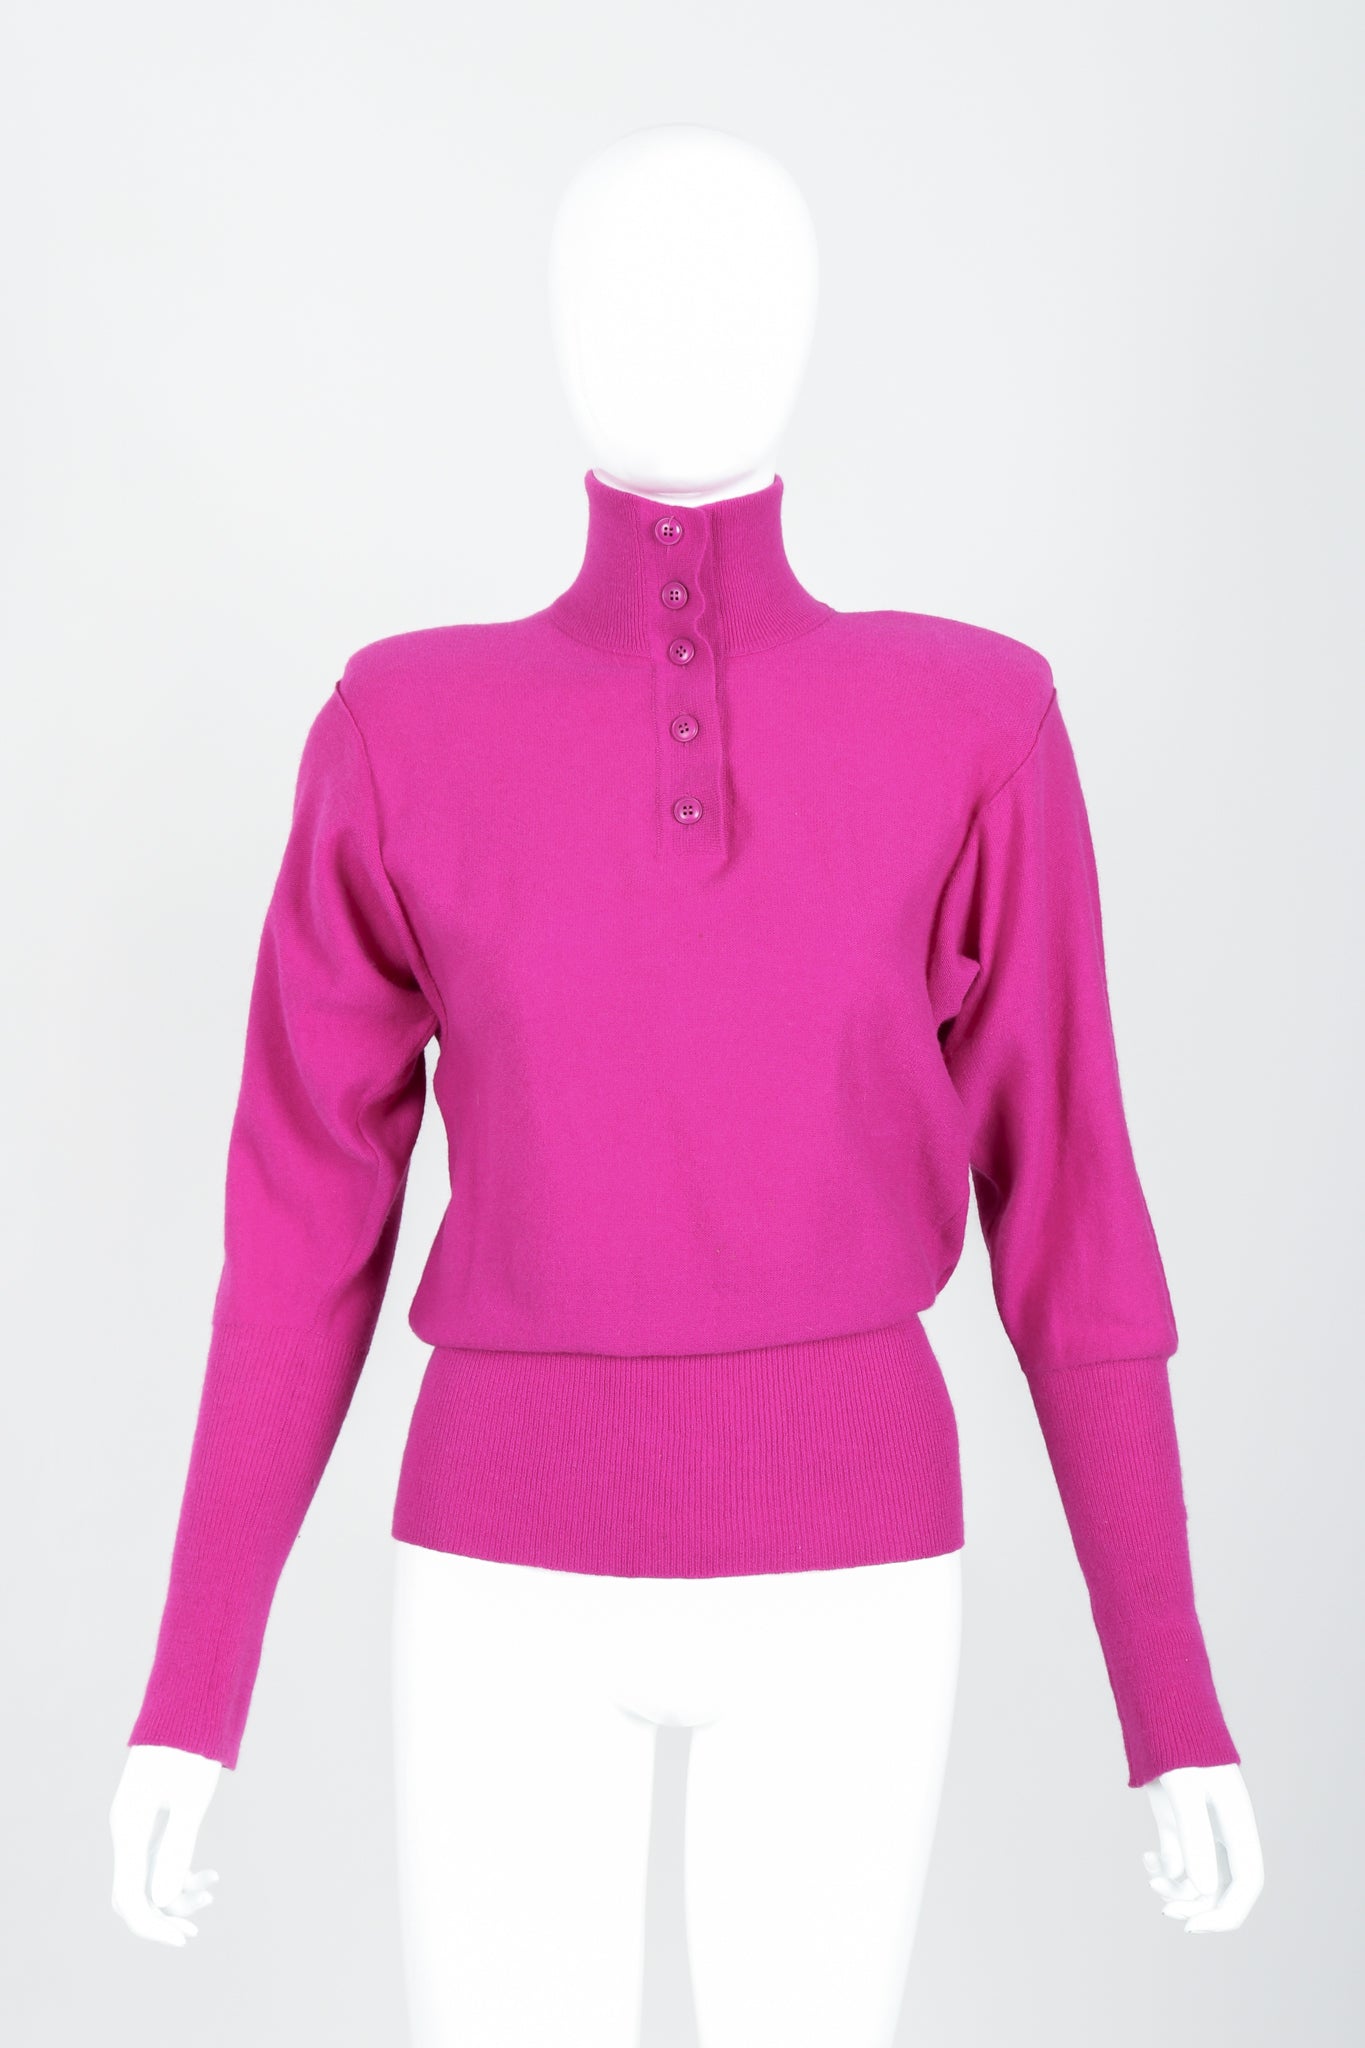 Vintage Sonia Rykiel Magenta Knit Popover Sweater on Mannequin Front Buttoned at Recess